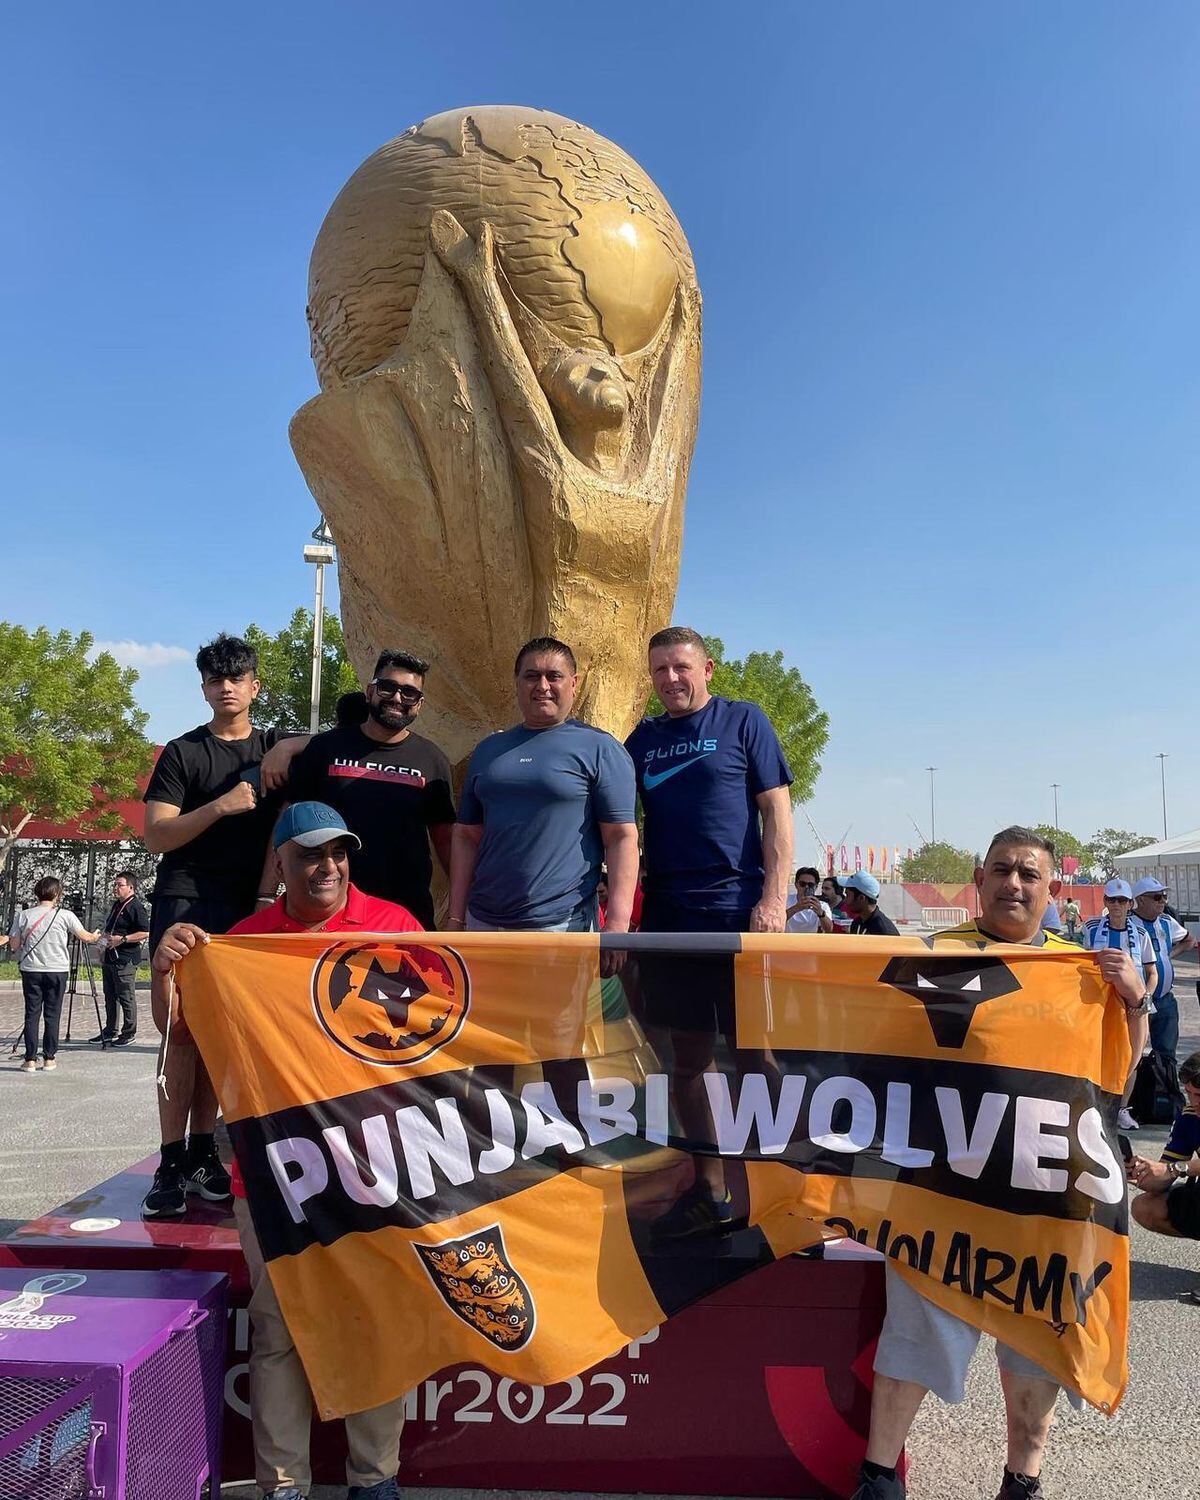 The group of fans representing Punjabi Wolves in Qatar